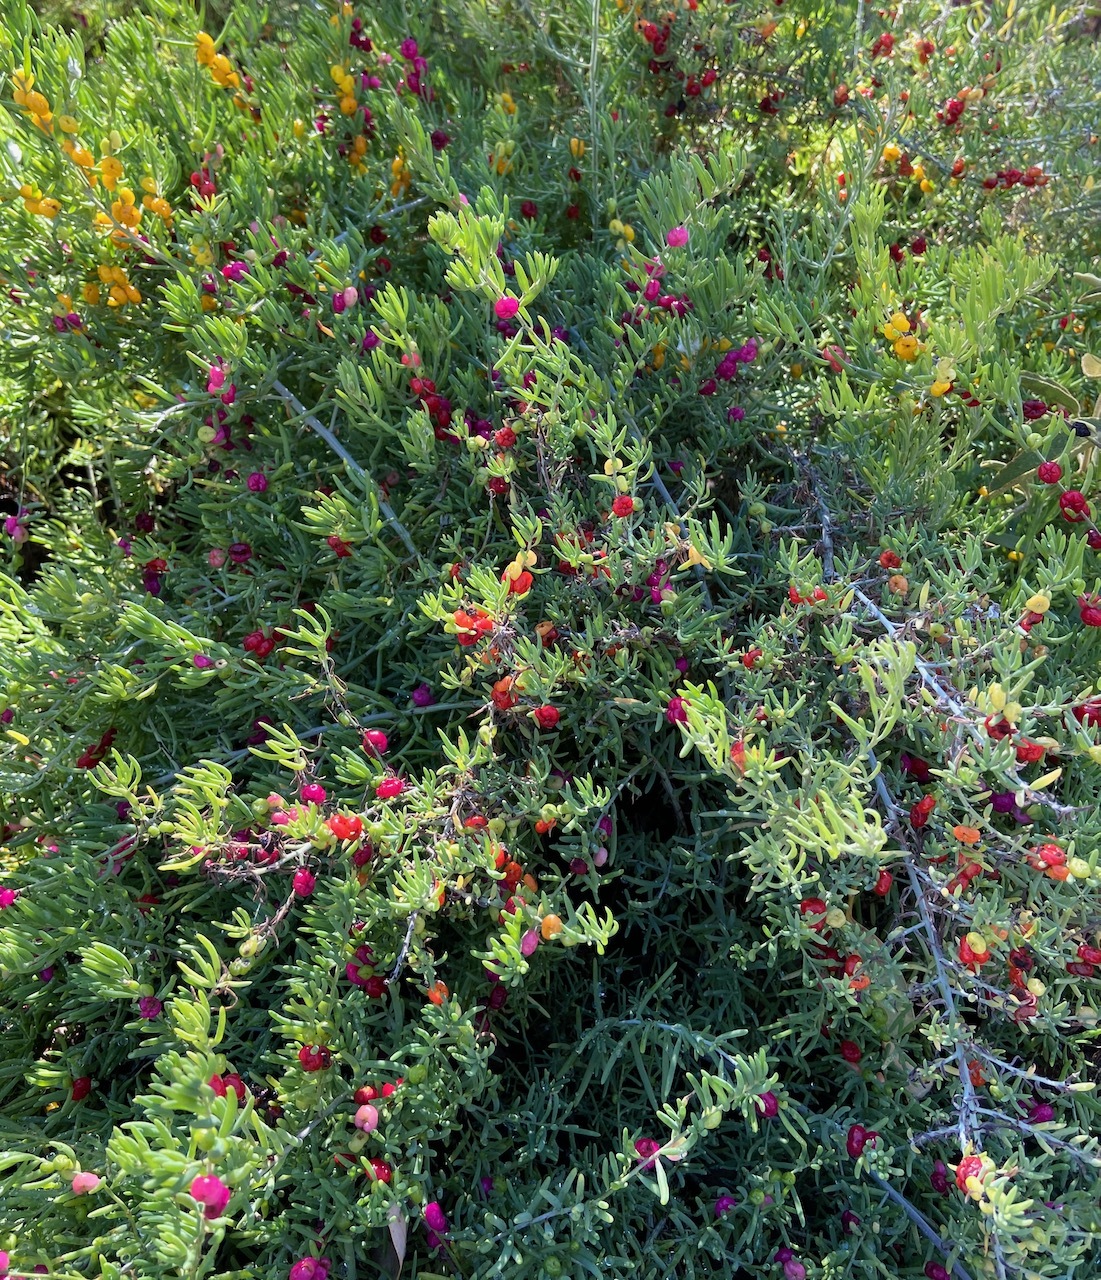 A green shrub is speckled with dots of pink, red, and yellow - Ruby Saltbush berries